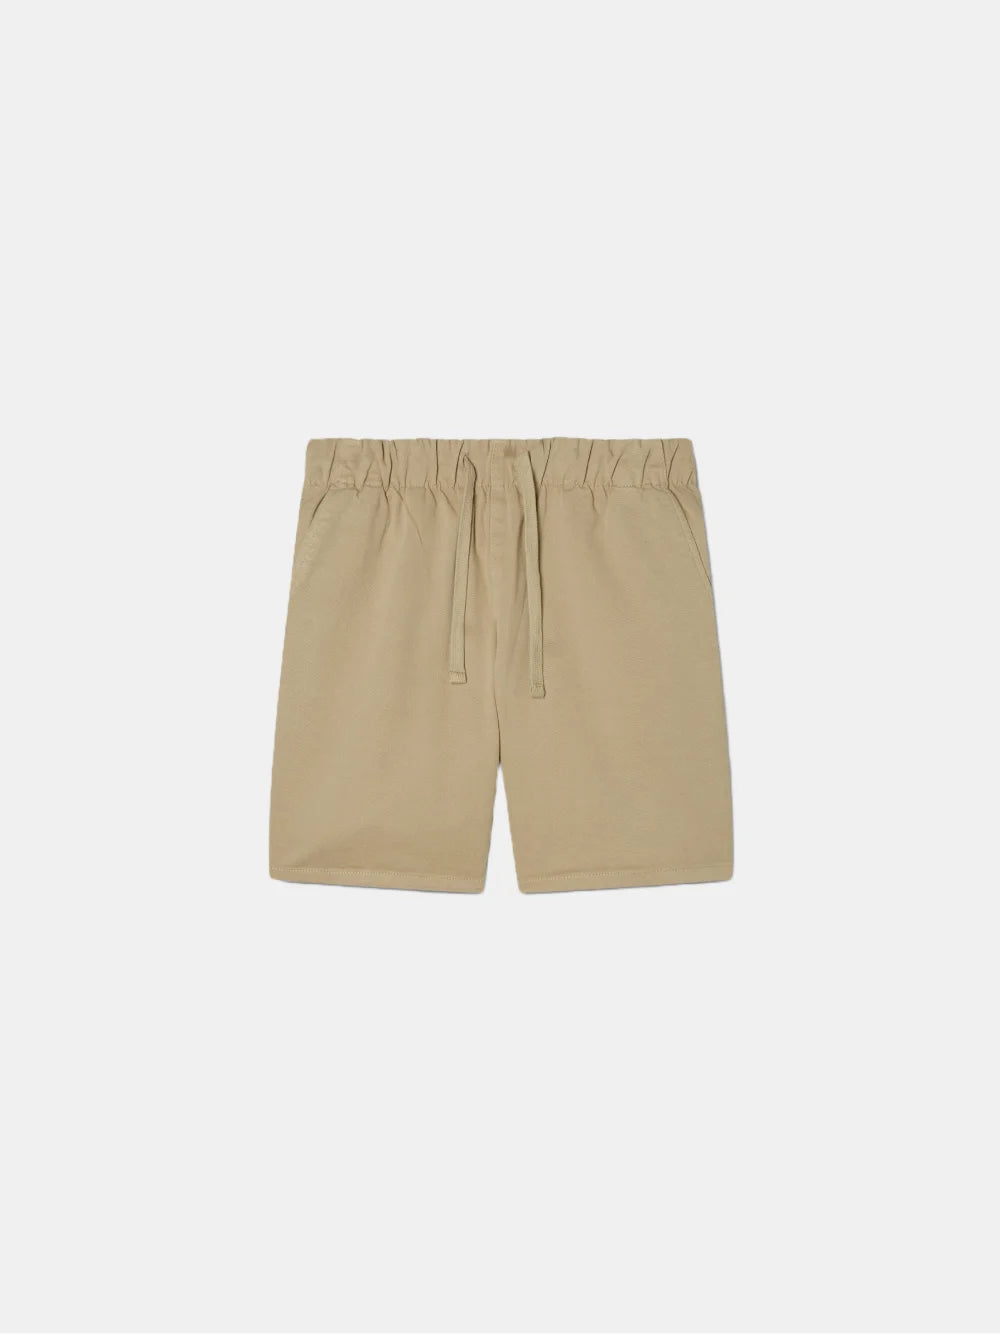 The Casual Short